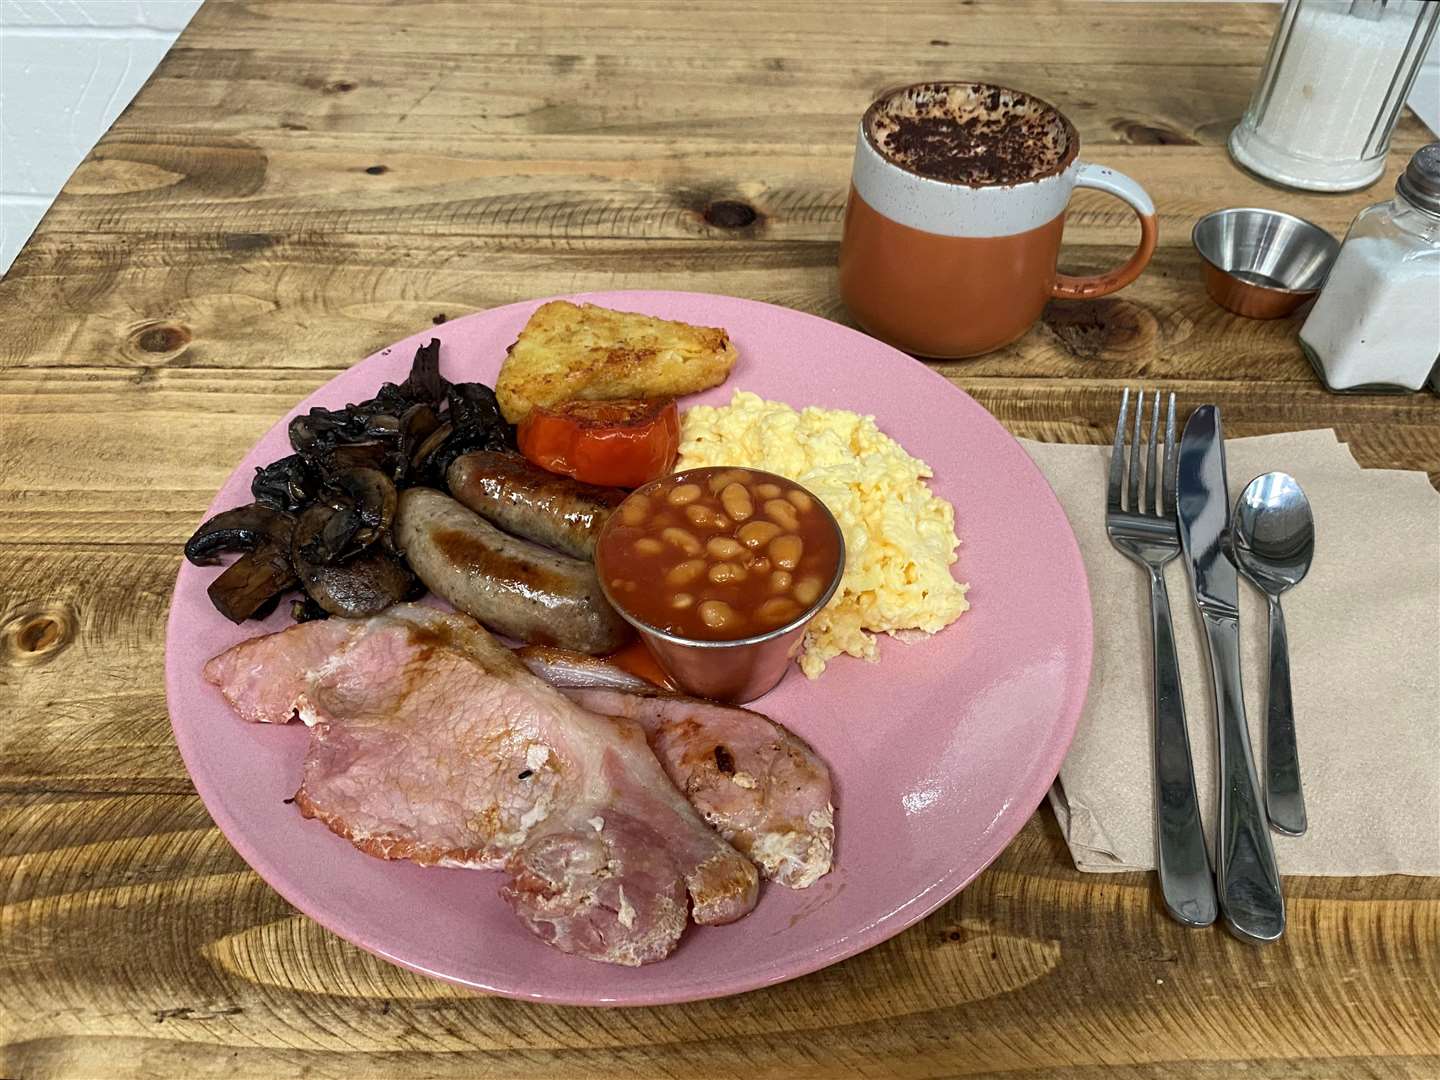 The full English breakfast and cappuccino came to £14.50